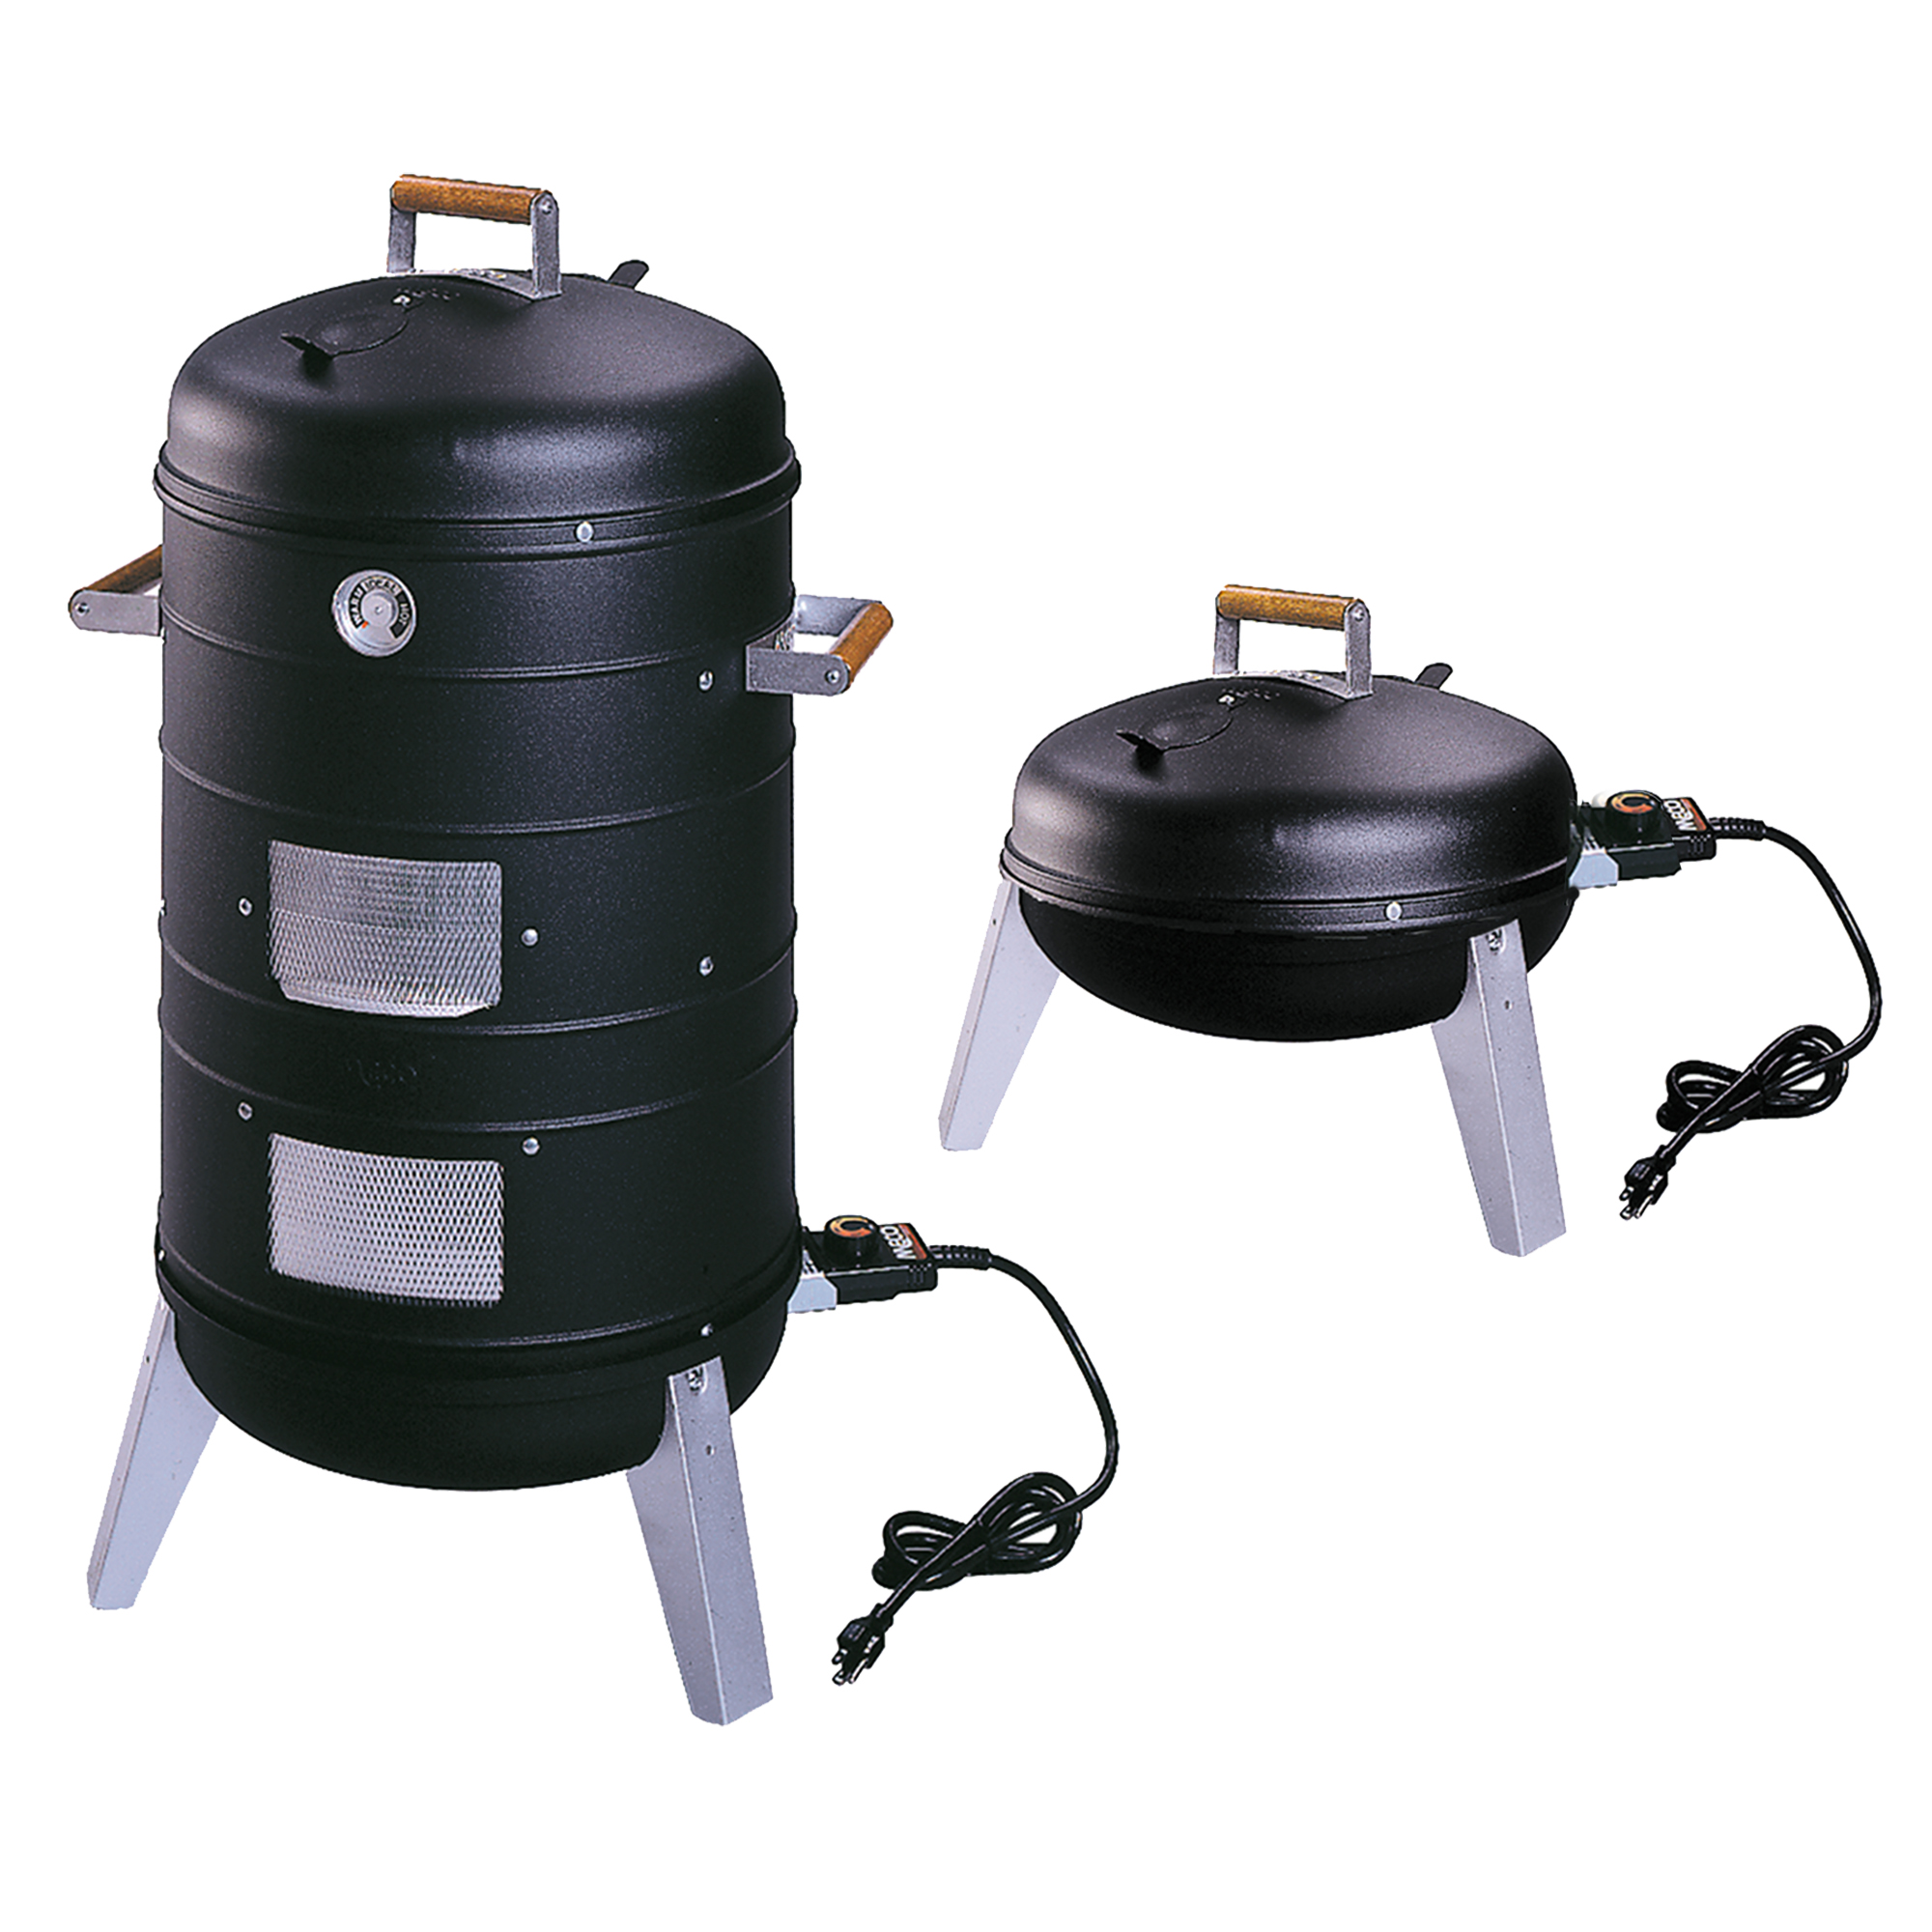 Americana 2-in-1 Electric Combination Water Smoker - image 1 of 10